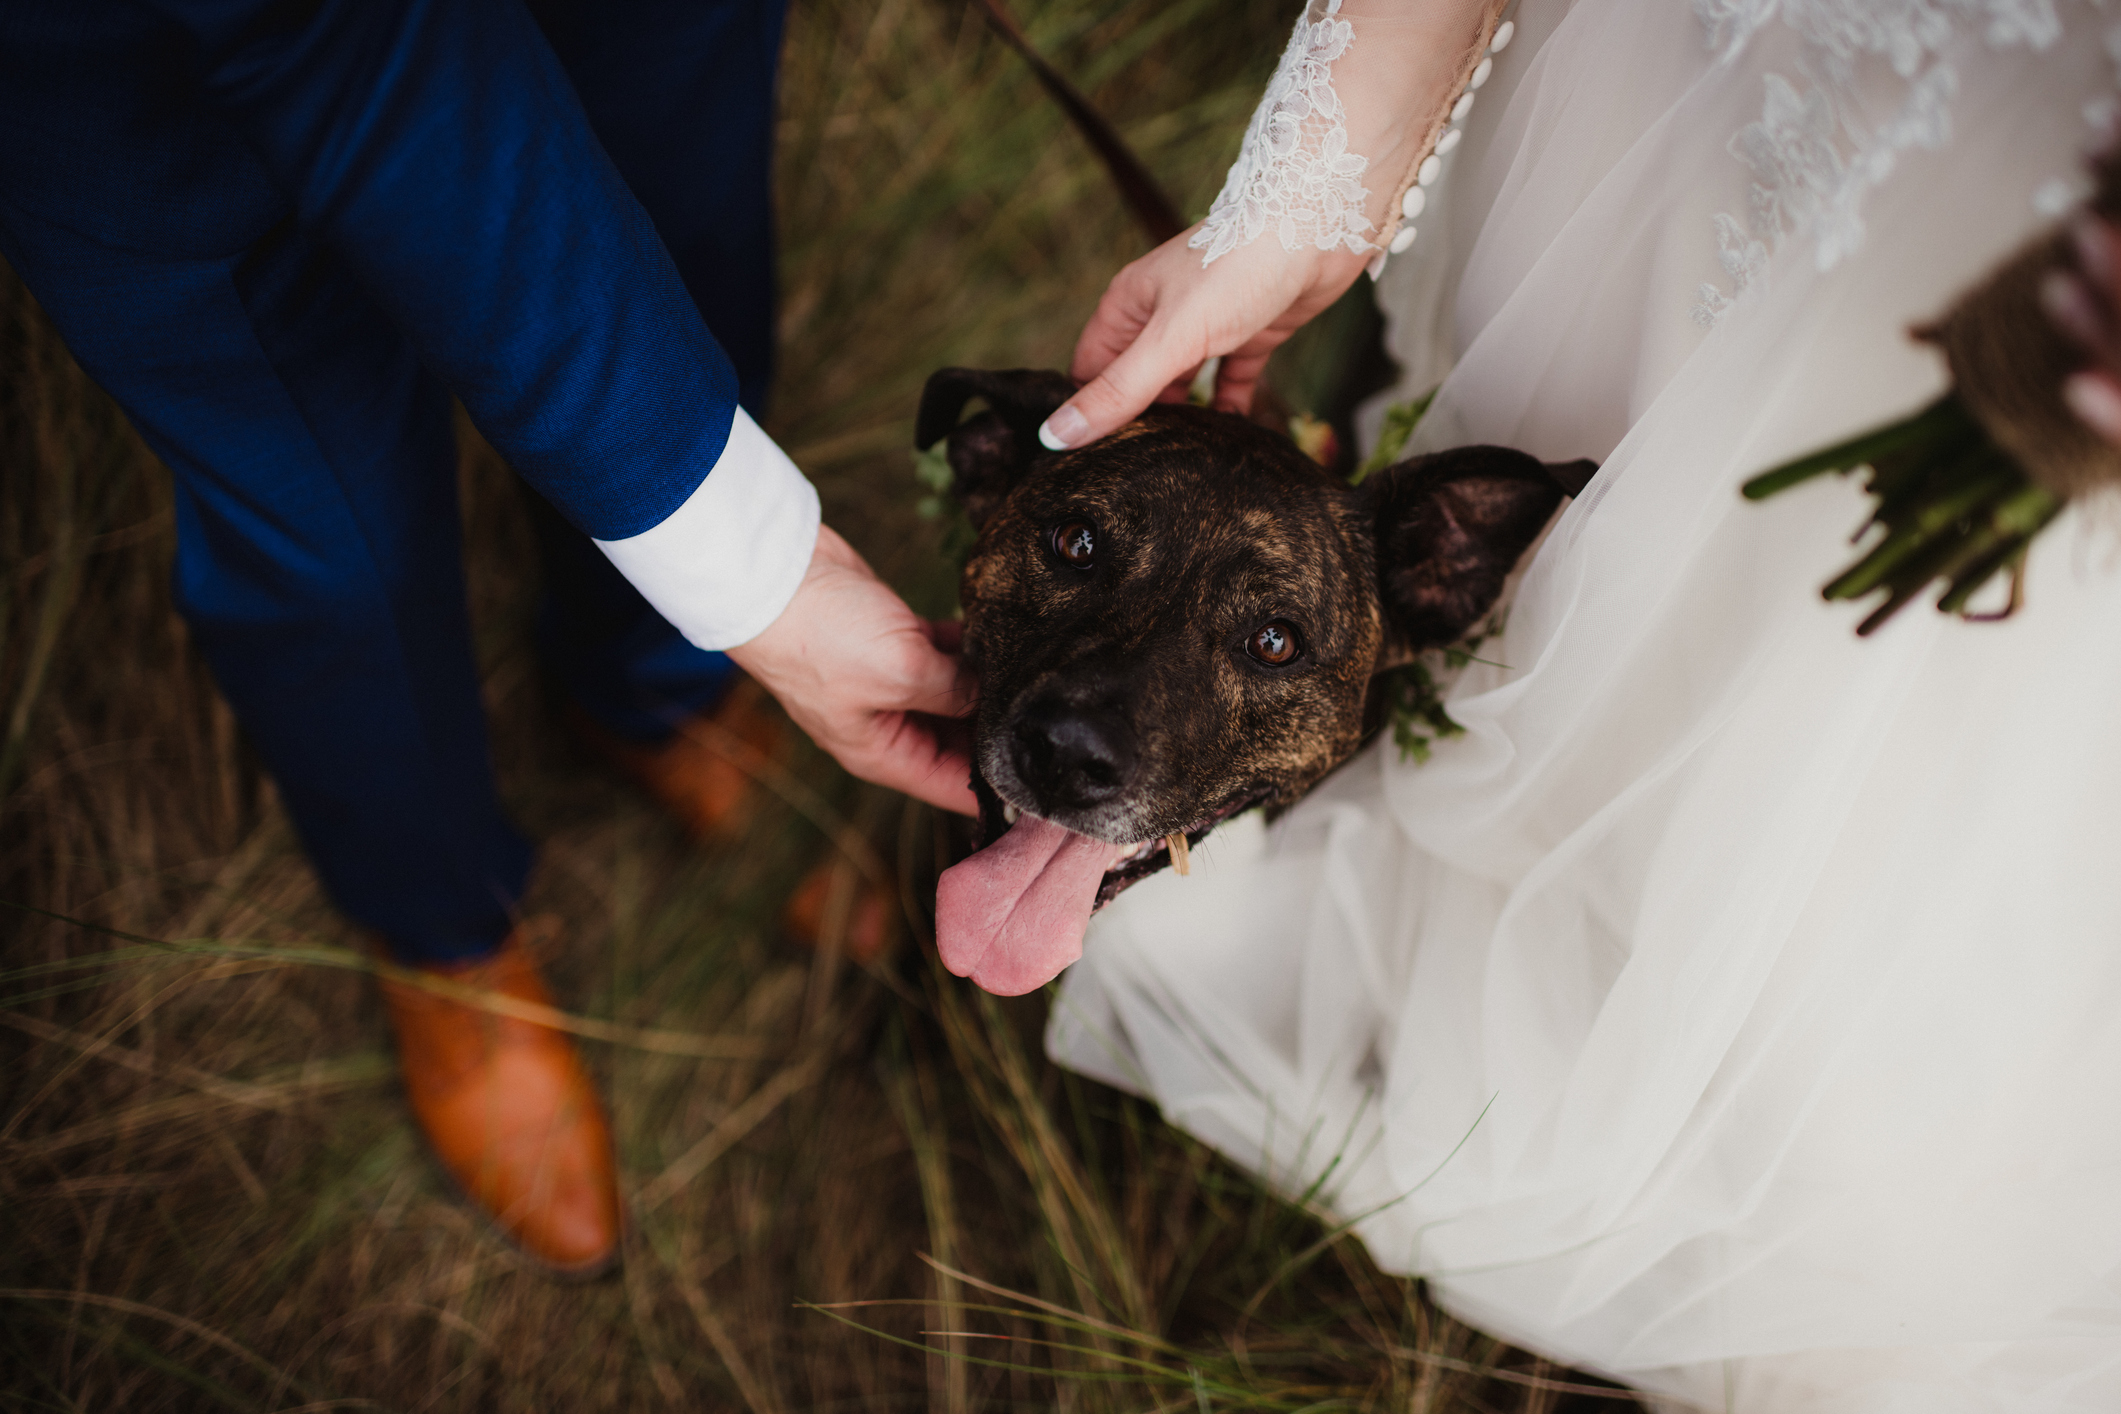 Bride in a lace dress and groom in a blue suit petting a happy dog at a wedding